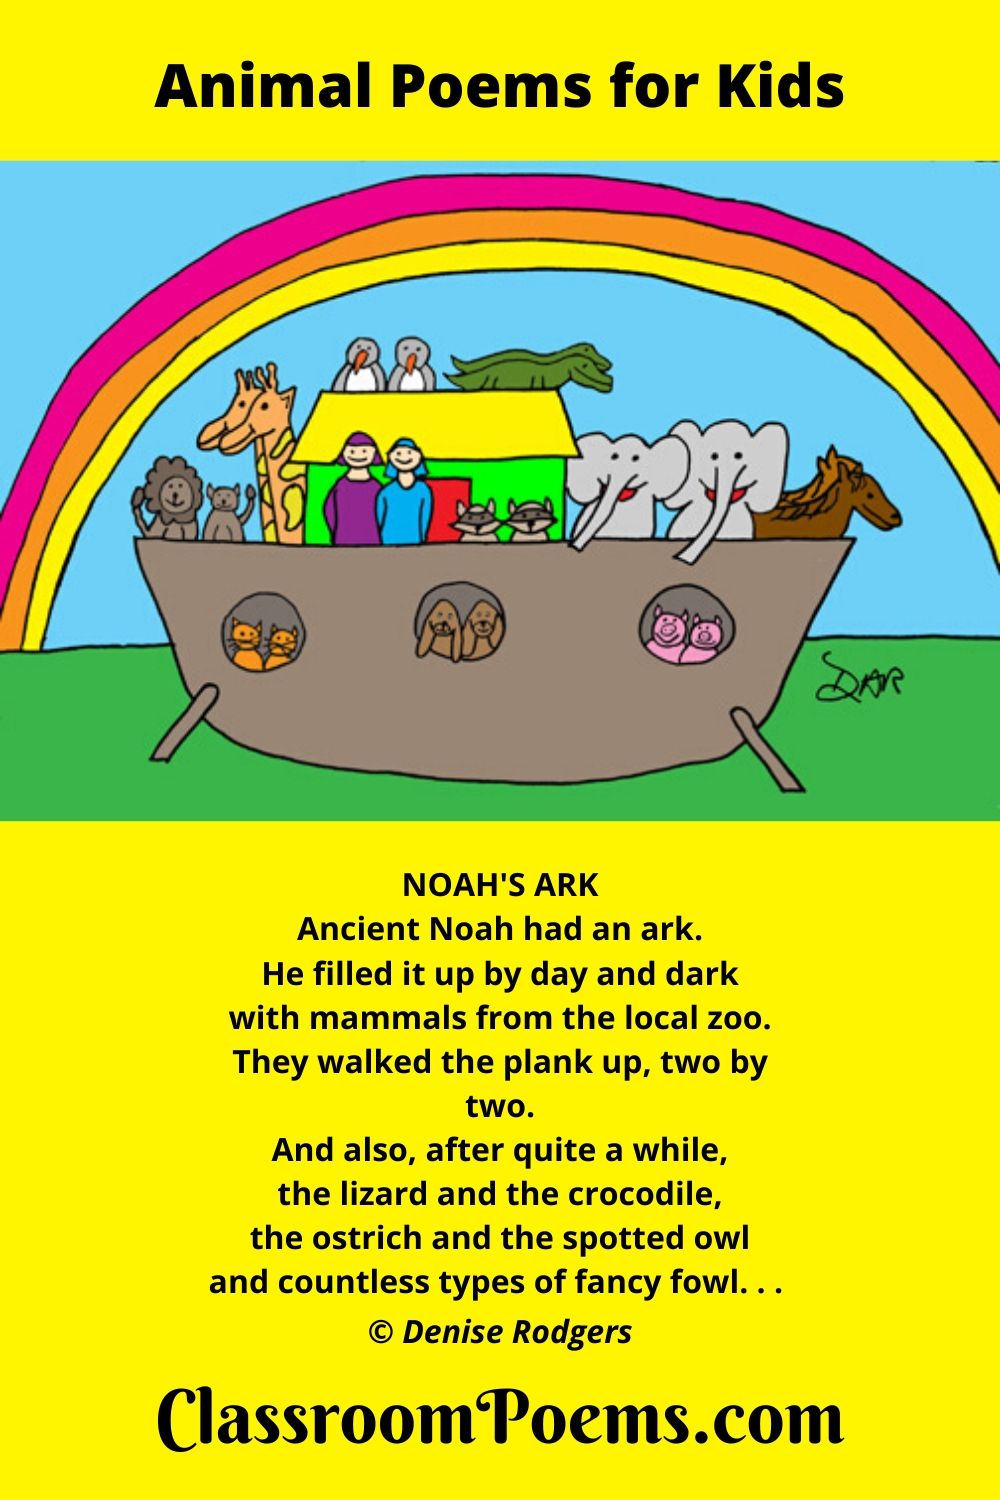 These funny animal poems are all about wild animals as well as zoo poems, pet poems, and more.  Enjoy funny rhymes about elephants, beaver, caribou, a snail and much, much more...